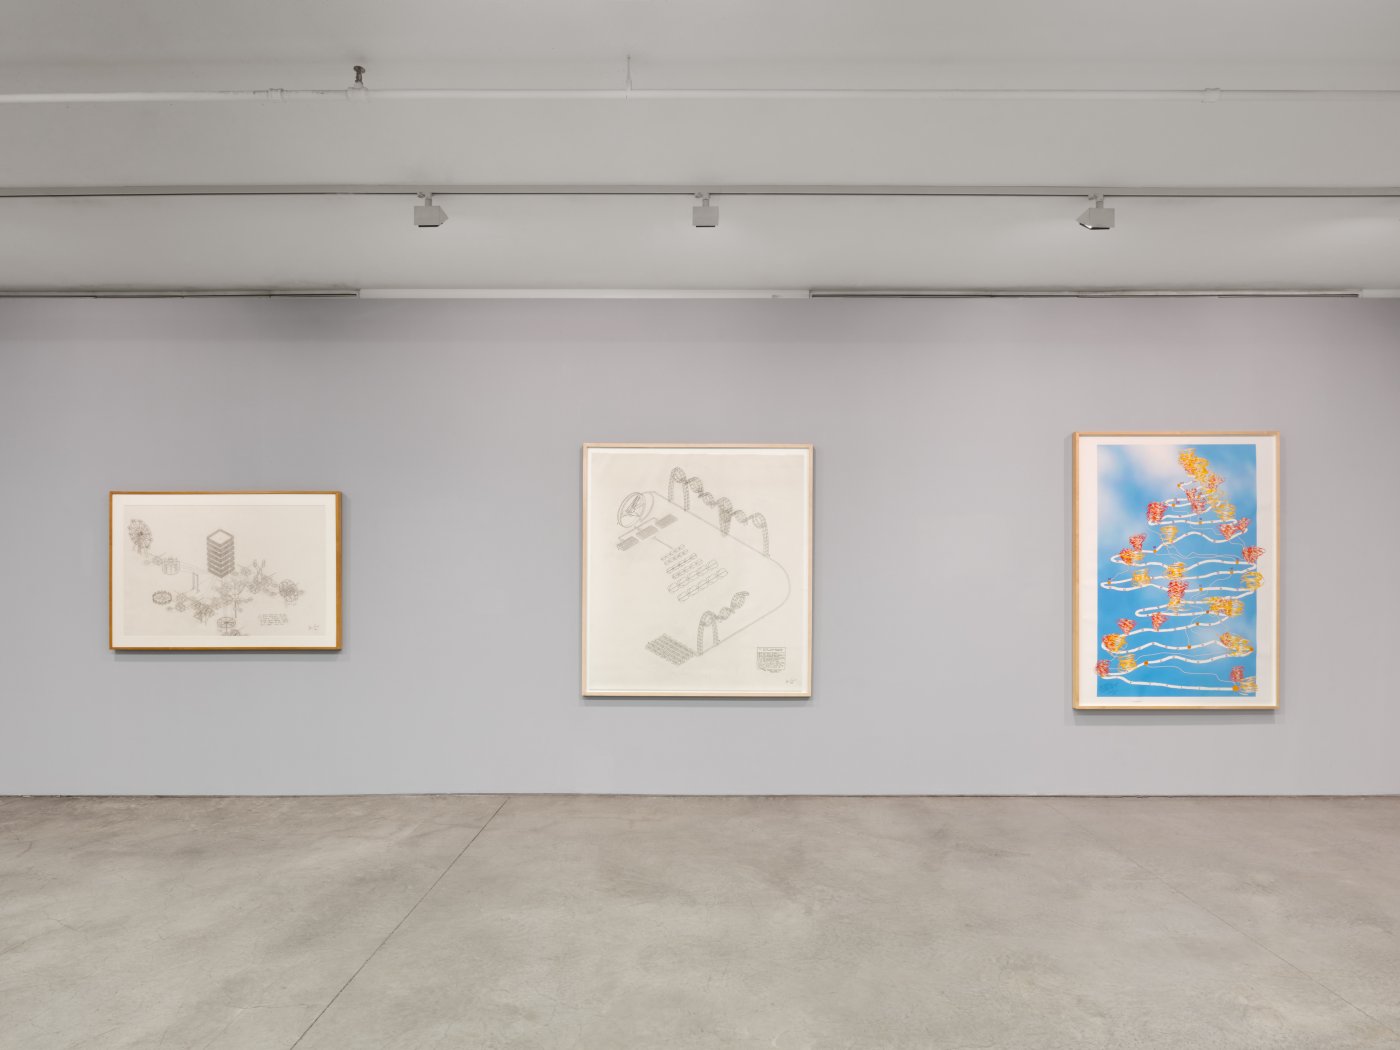 Installation image for Alice Aycock: Works on Paper, at Marlborough